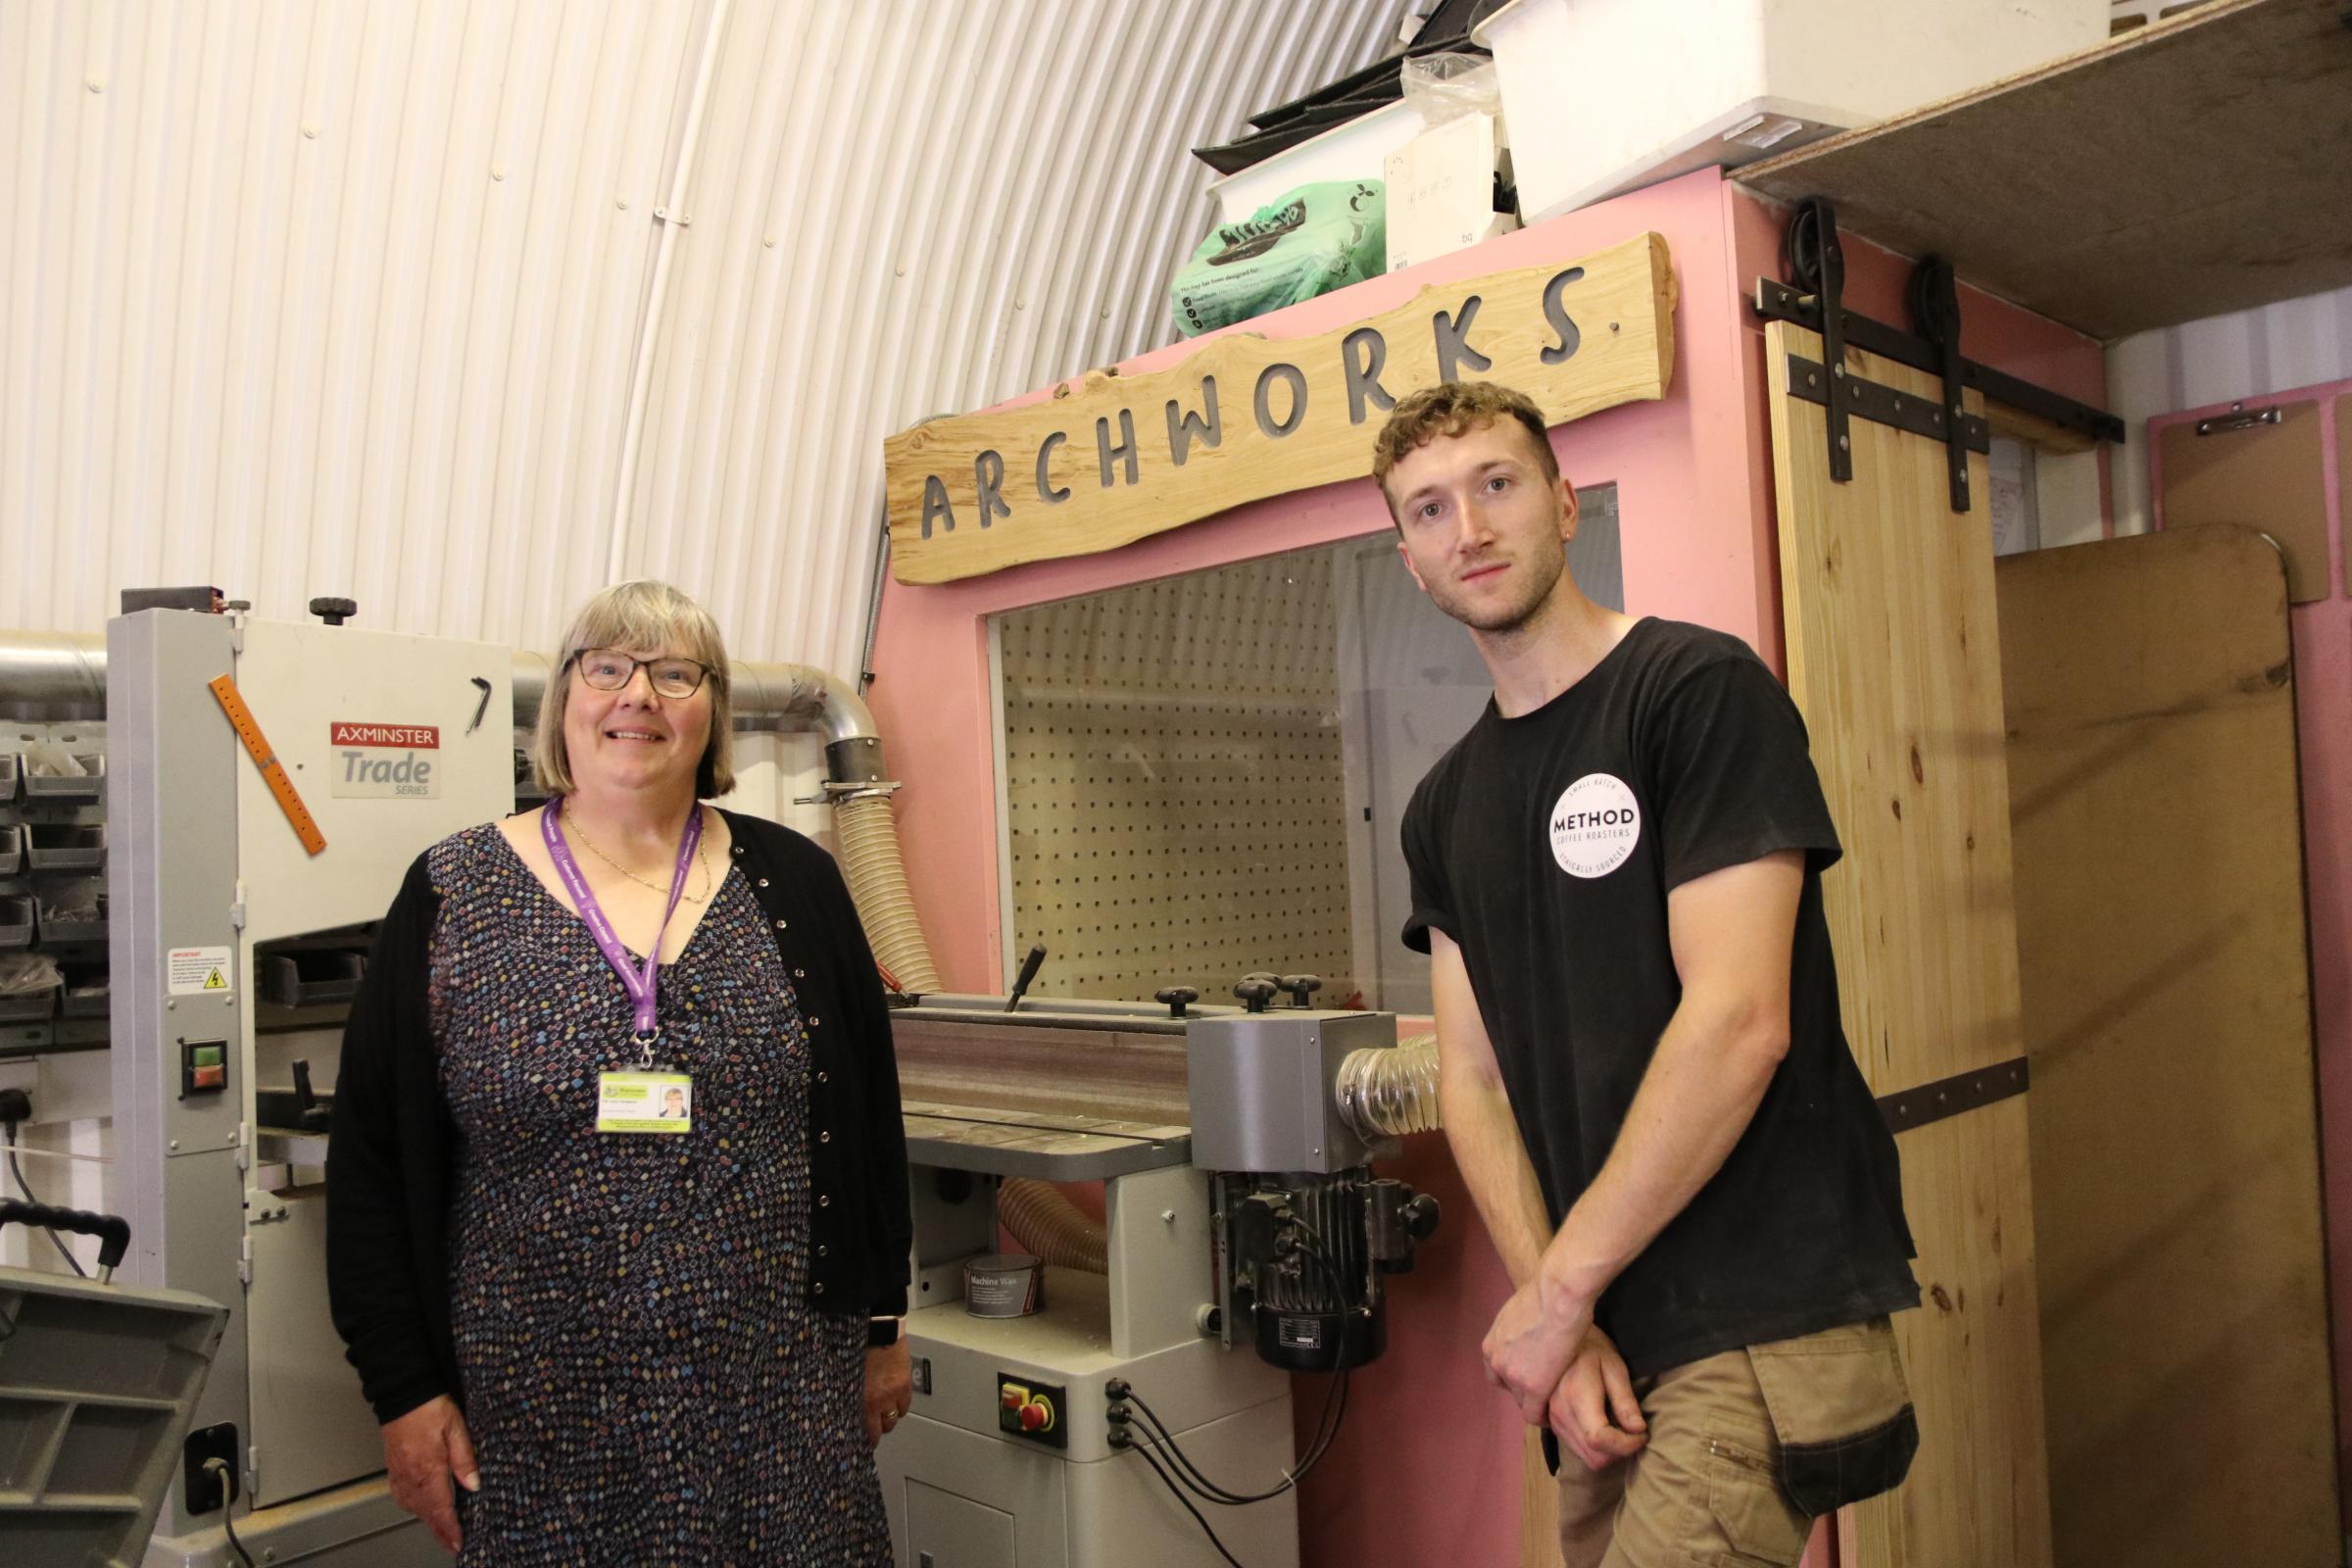 Cllr Lucy Hodgson with Jack, owner of Archworks